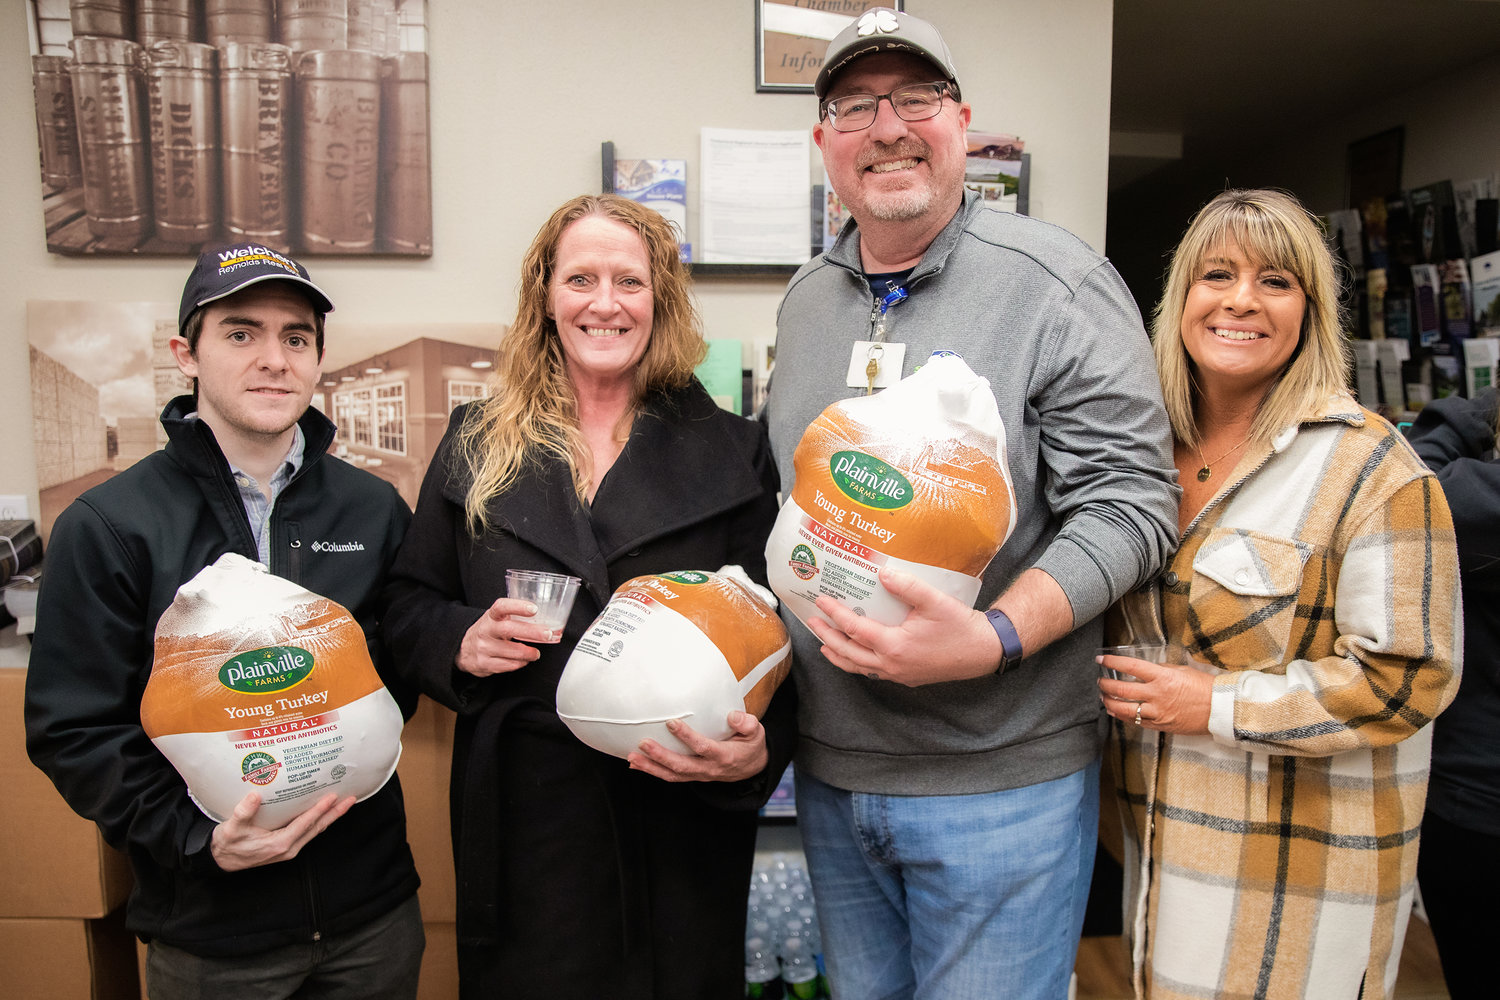 From left, Jake Stepp, Christy Ward, Chris Thomas and Lindy Waring pose for a photo after winning frozen turkeys during a Business After Hours event at the Centralia-Chehalis Chamber of Commerce building.